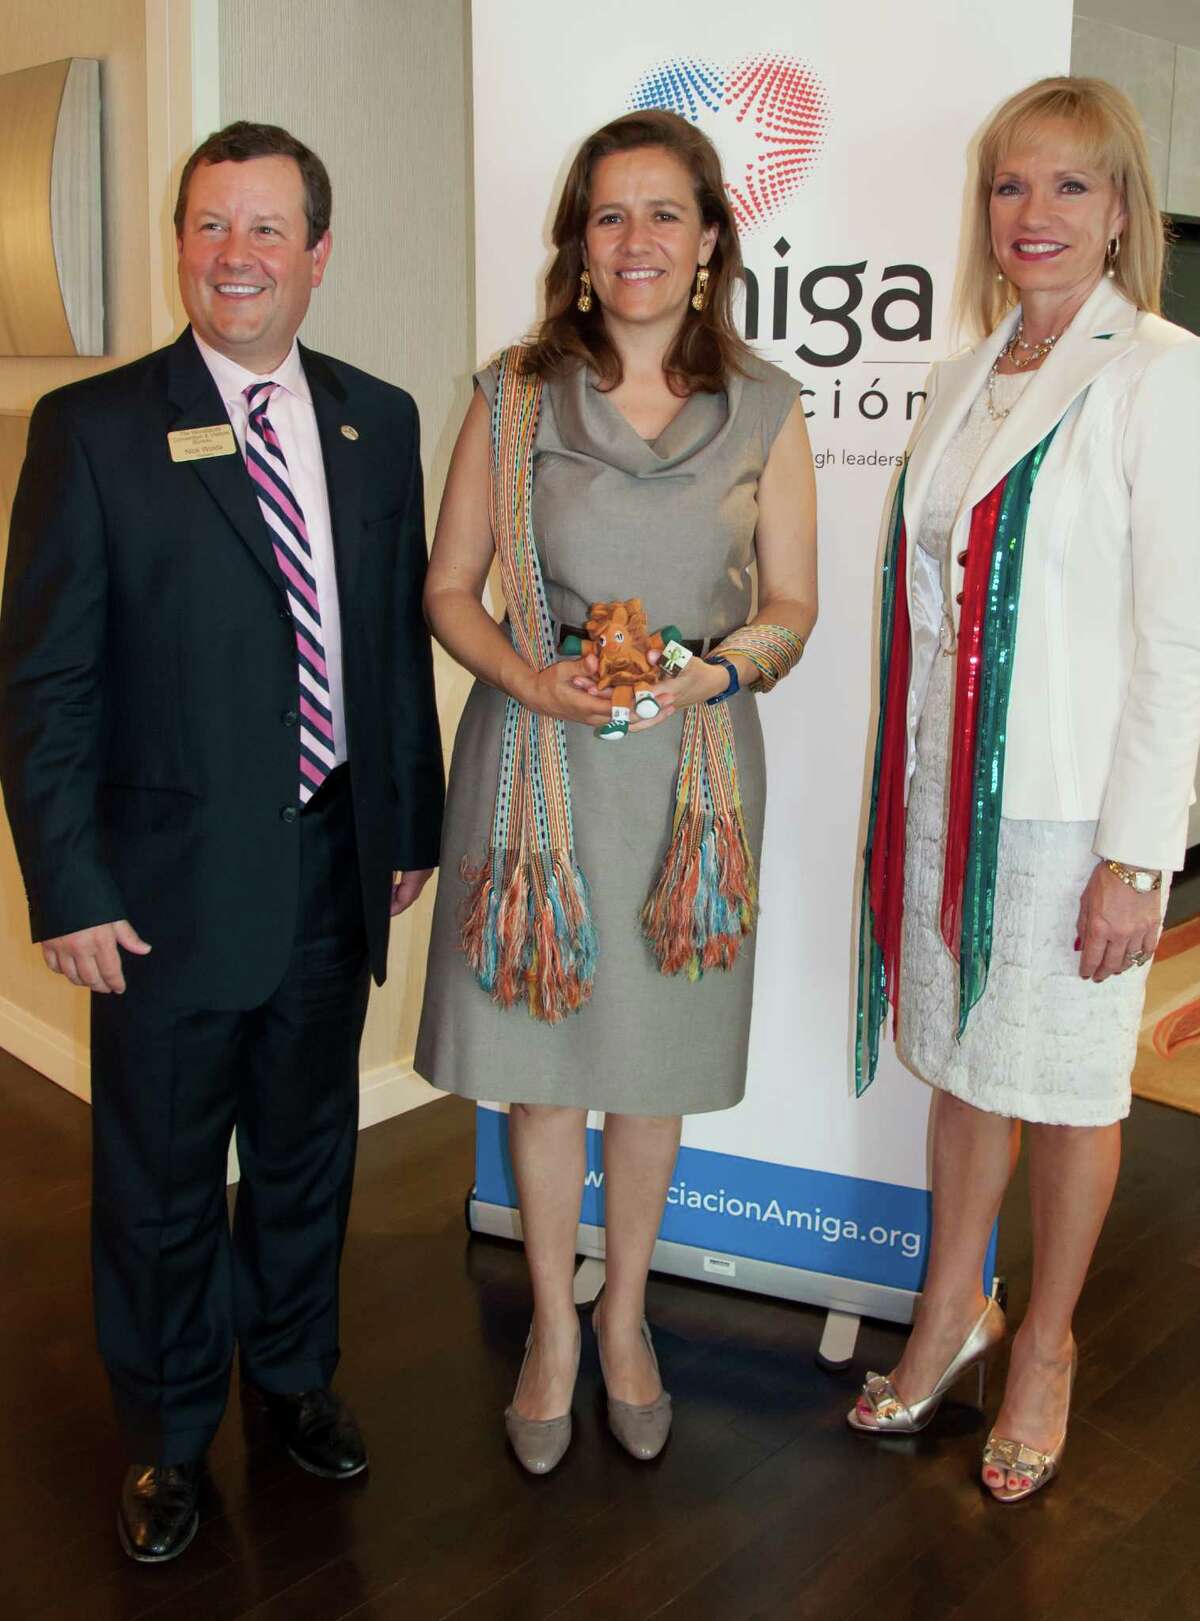 Pictured left to right: Nick Wolda, President of The Woodlands CVB; Margarita Zavala, the former First Lady of Mexico; and Nelda Blair, Chairman of The Woodlands CVB